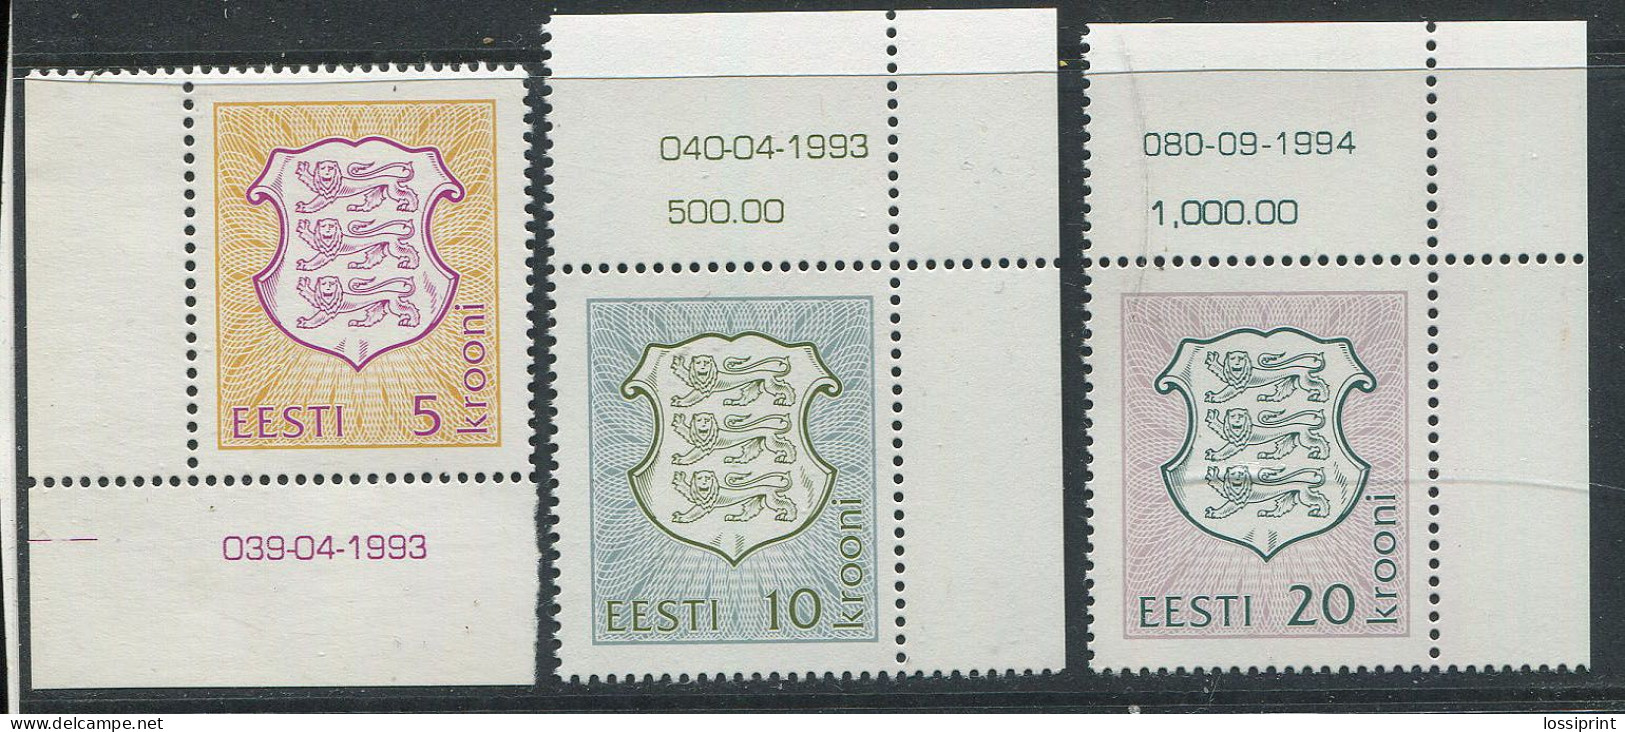 Estonia:Unused Stamps Serie Coat Of Arms, 5, 10 And 20 Krooni, 1993-1994, MNH, Corners - Timbres